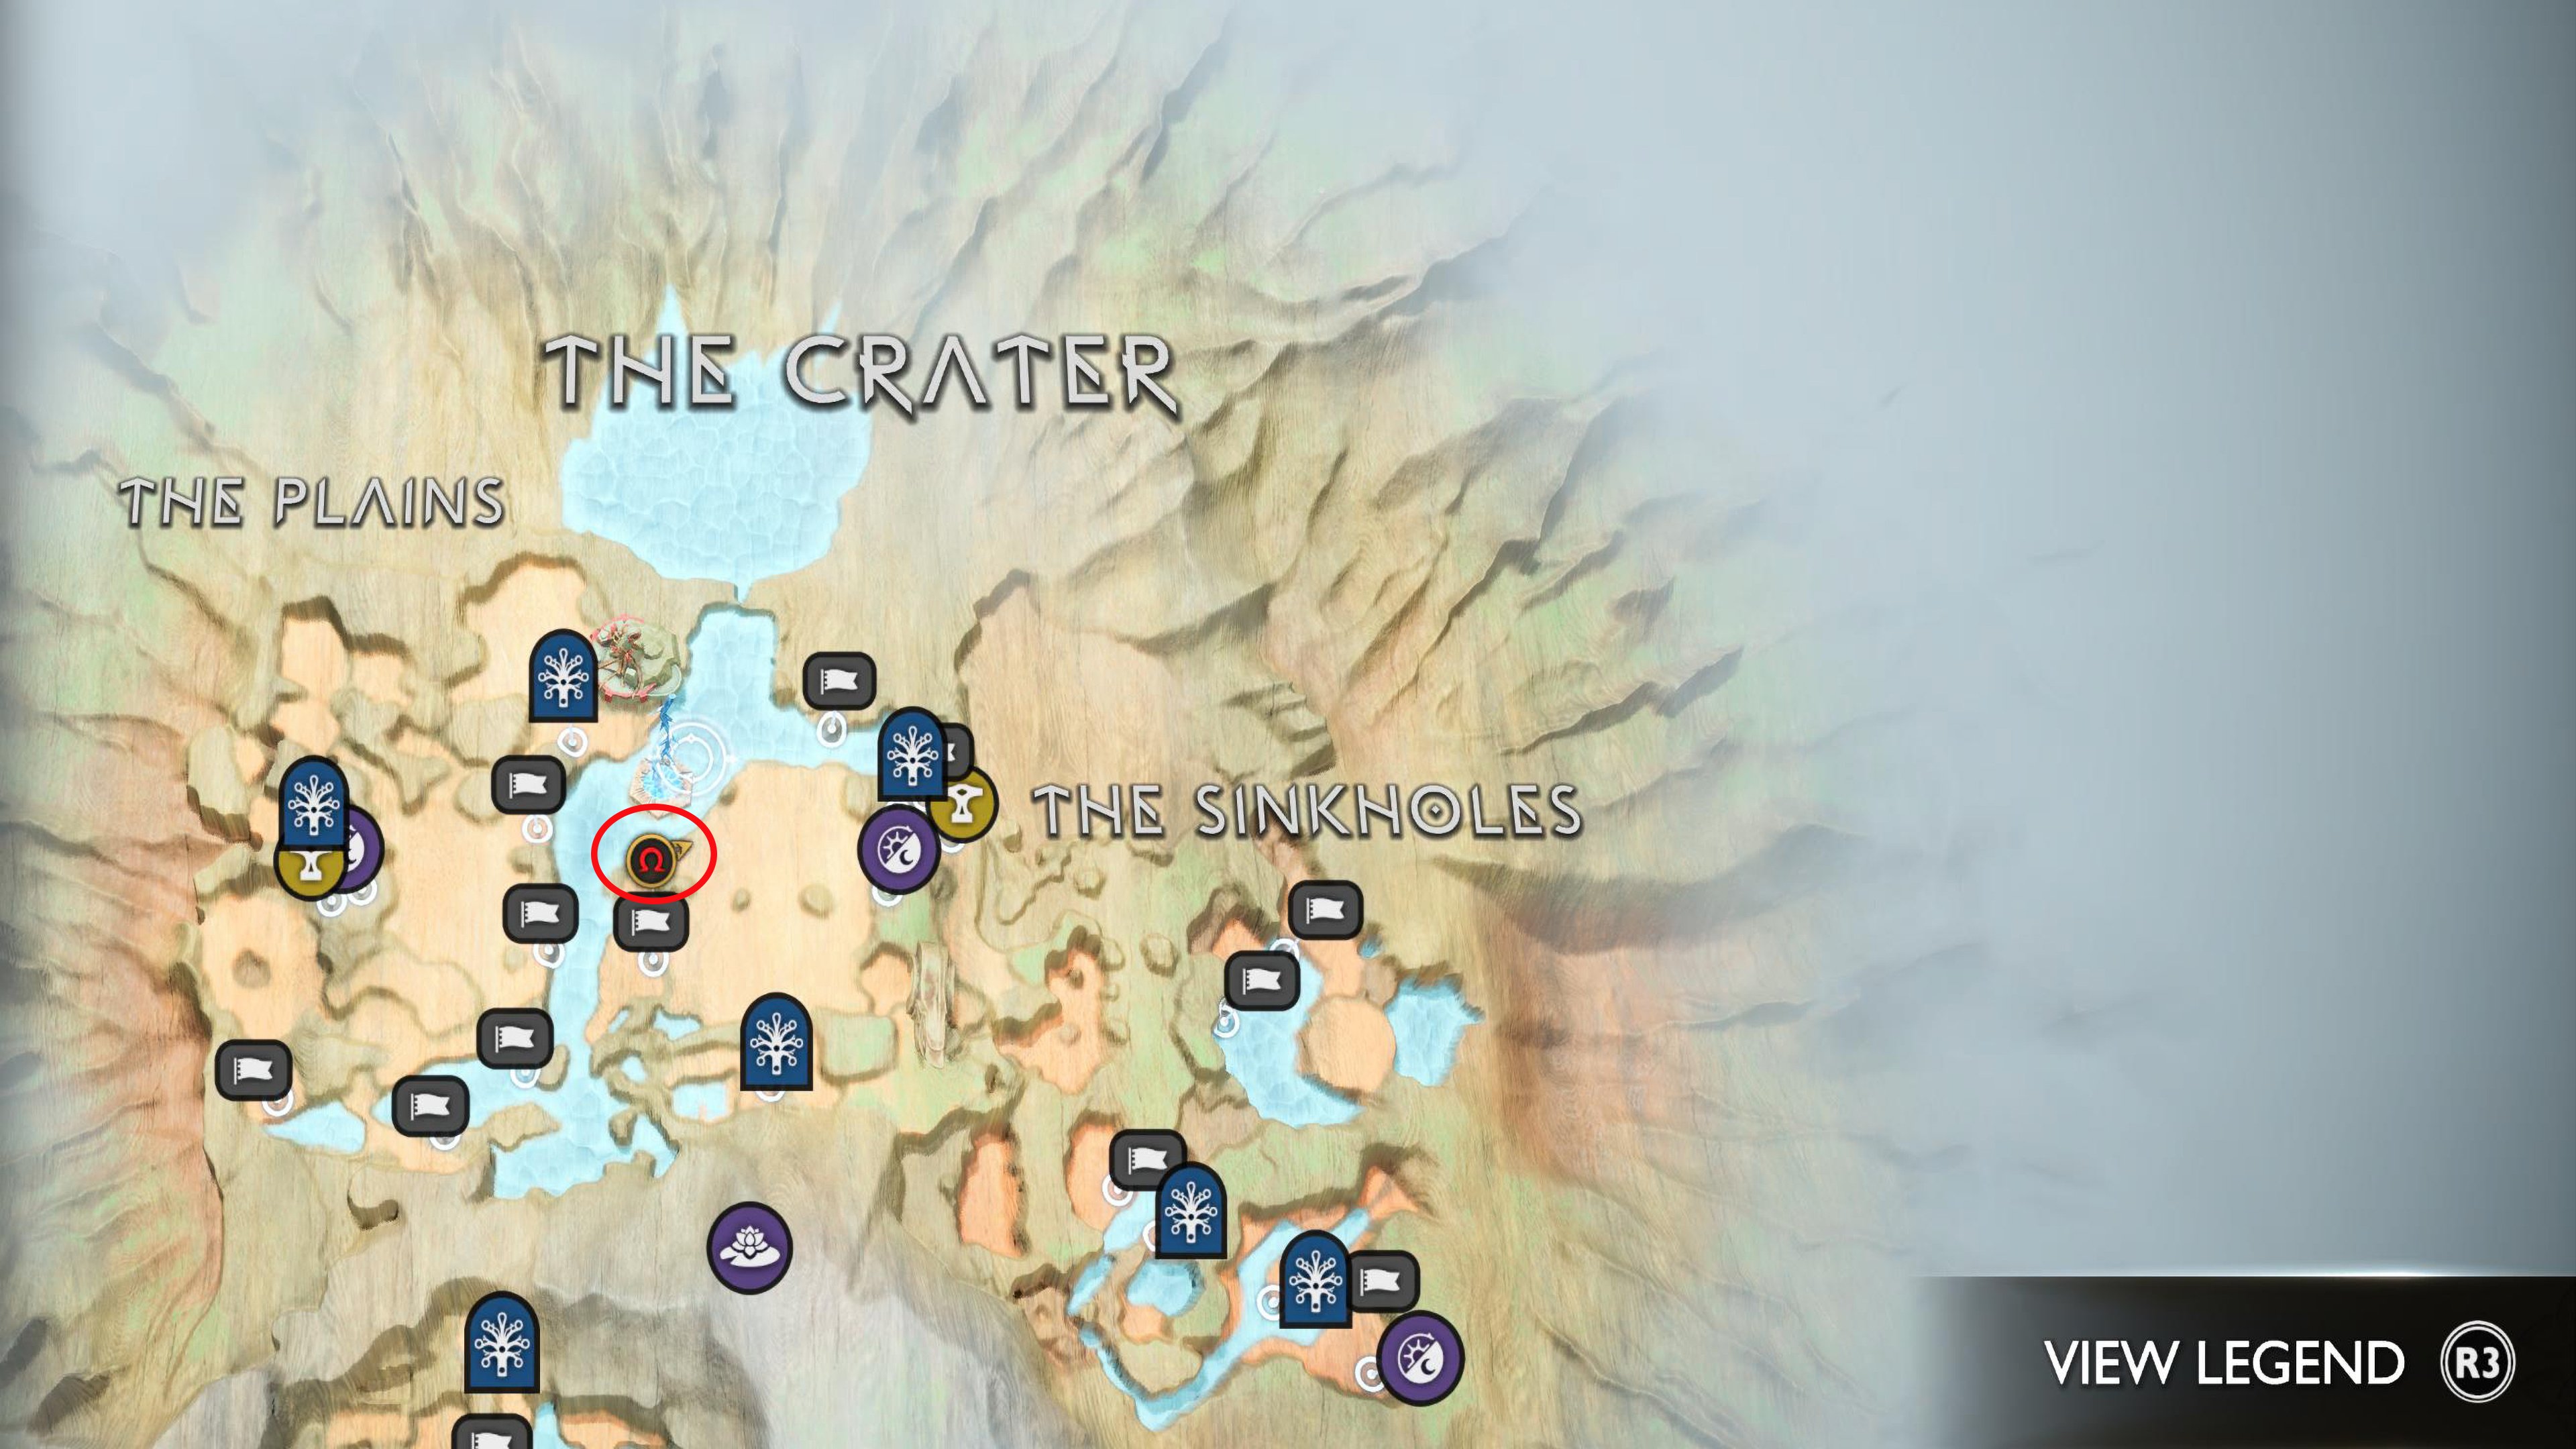 You can start the quest by heading northwest from The Crater Mystic Gateway.